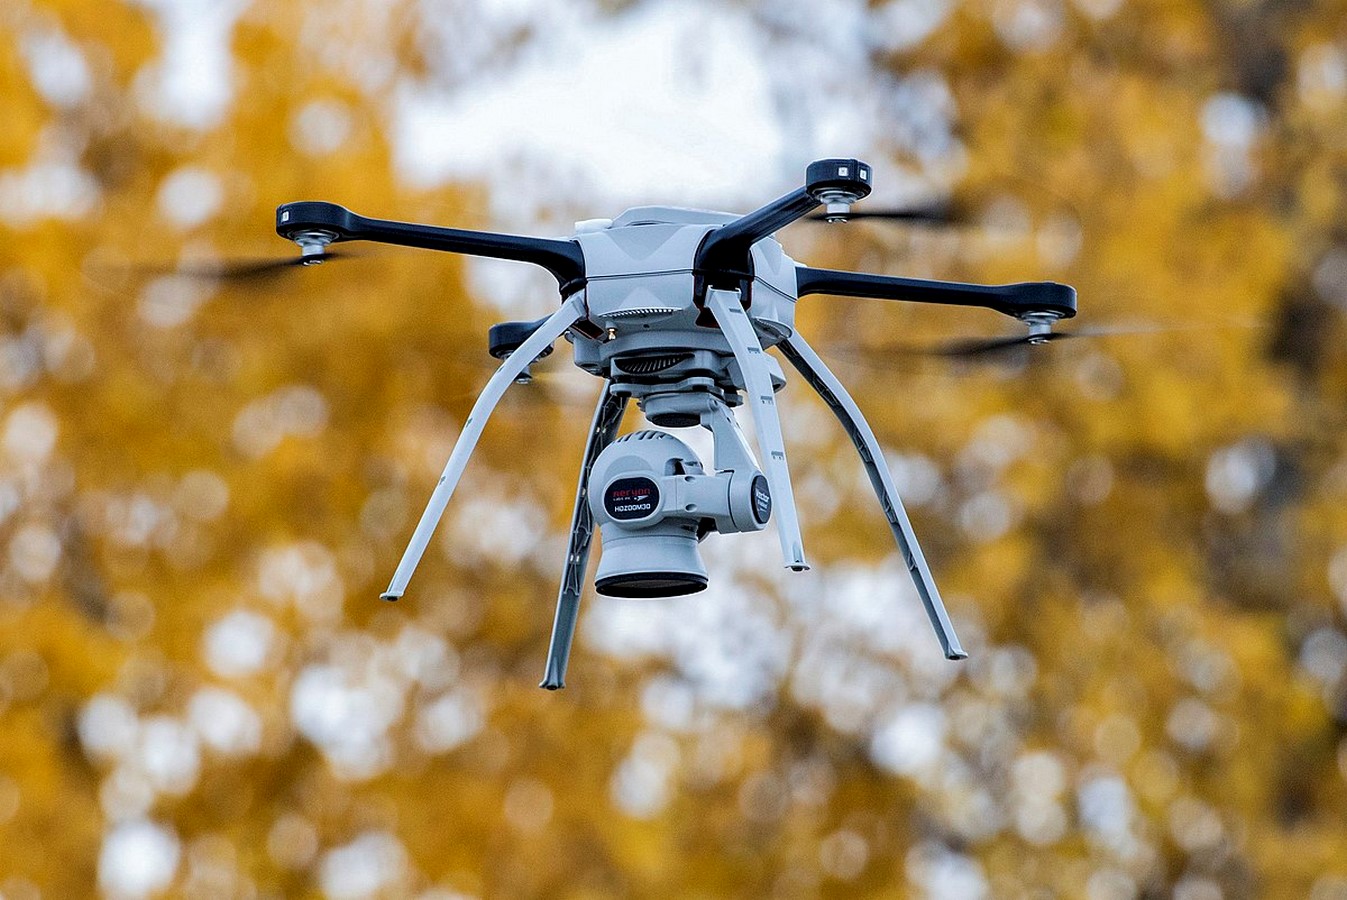 How can drones help architects in the future? - Sheet1